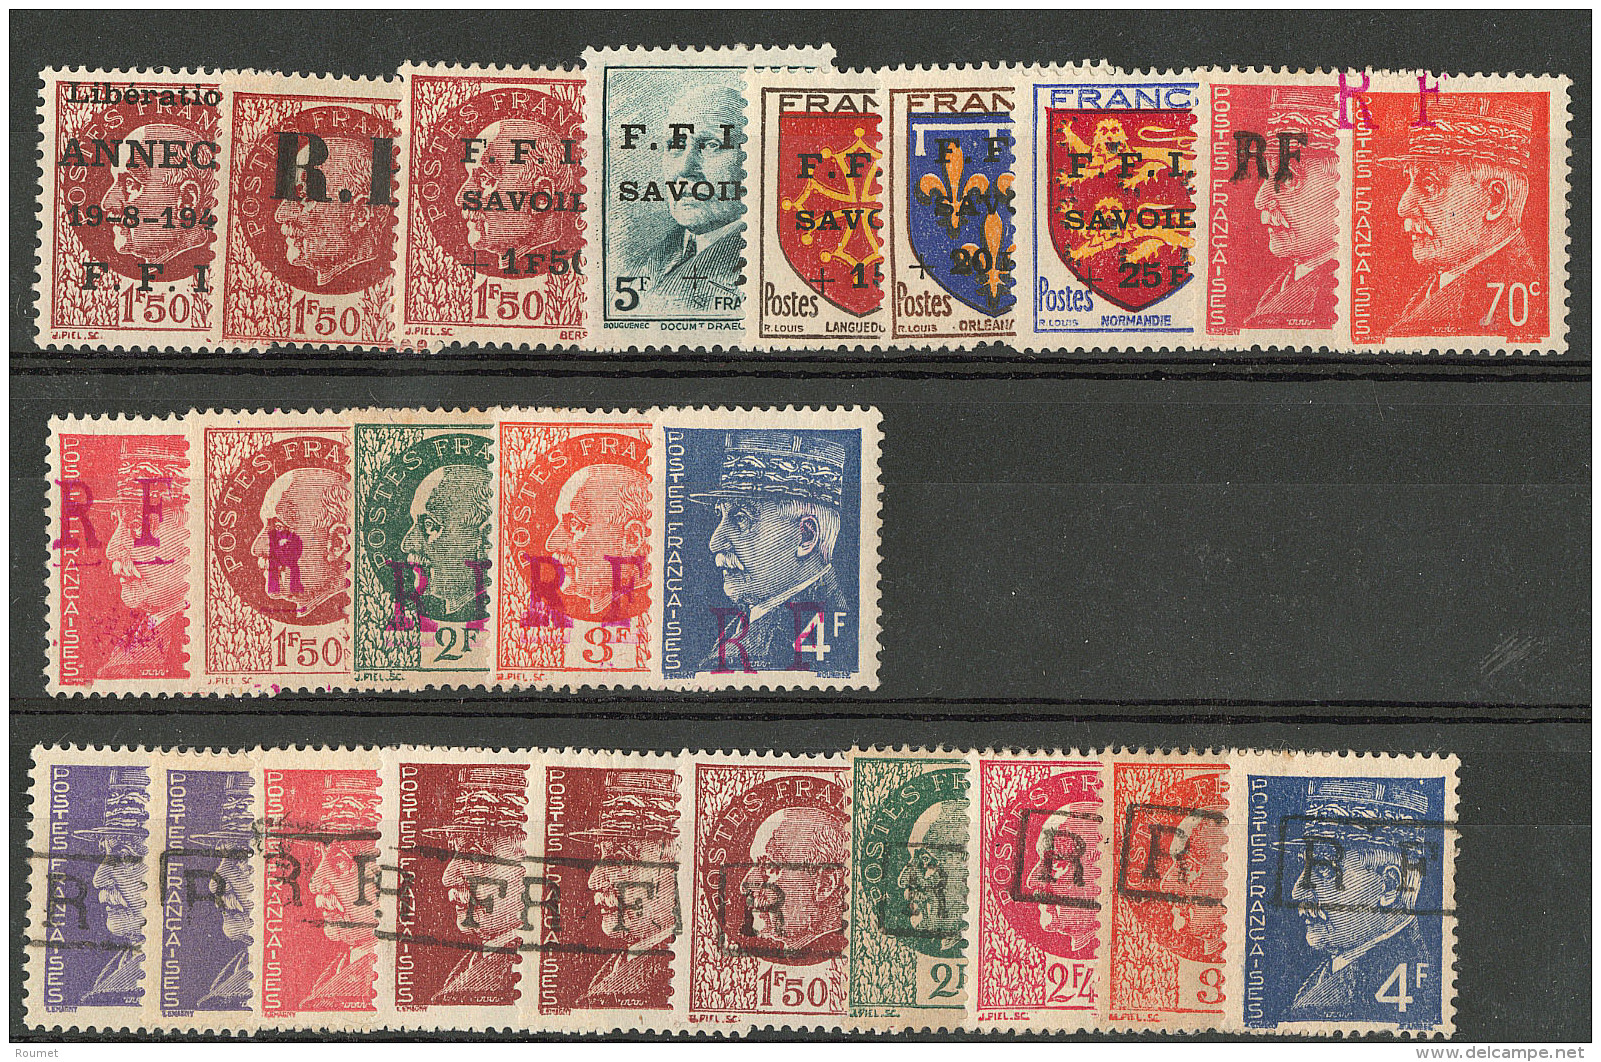 Collection 1945, Annecy 1, Chalon 1 **, Chamb&eacute;ry 1, 2, 4, 5c, 6c, Ch&acirc;tellerault 4, Niort 2, 4 &agrave; 7, 9 - Bevrijding